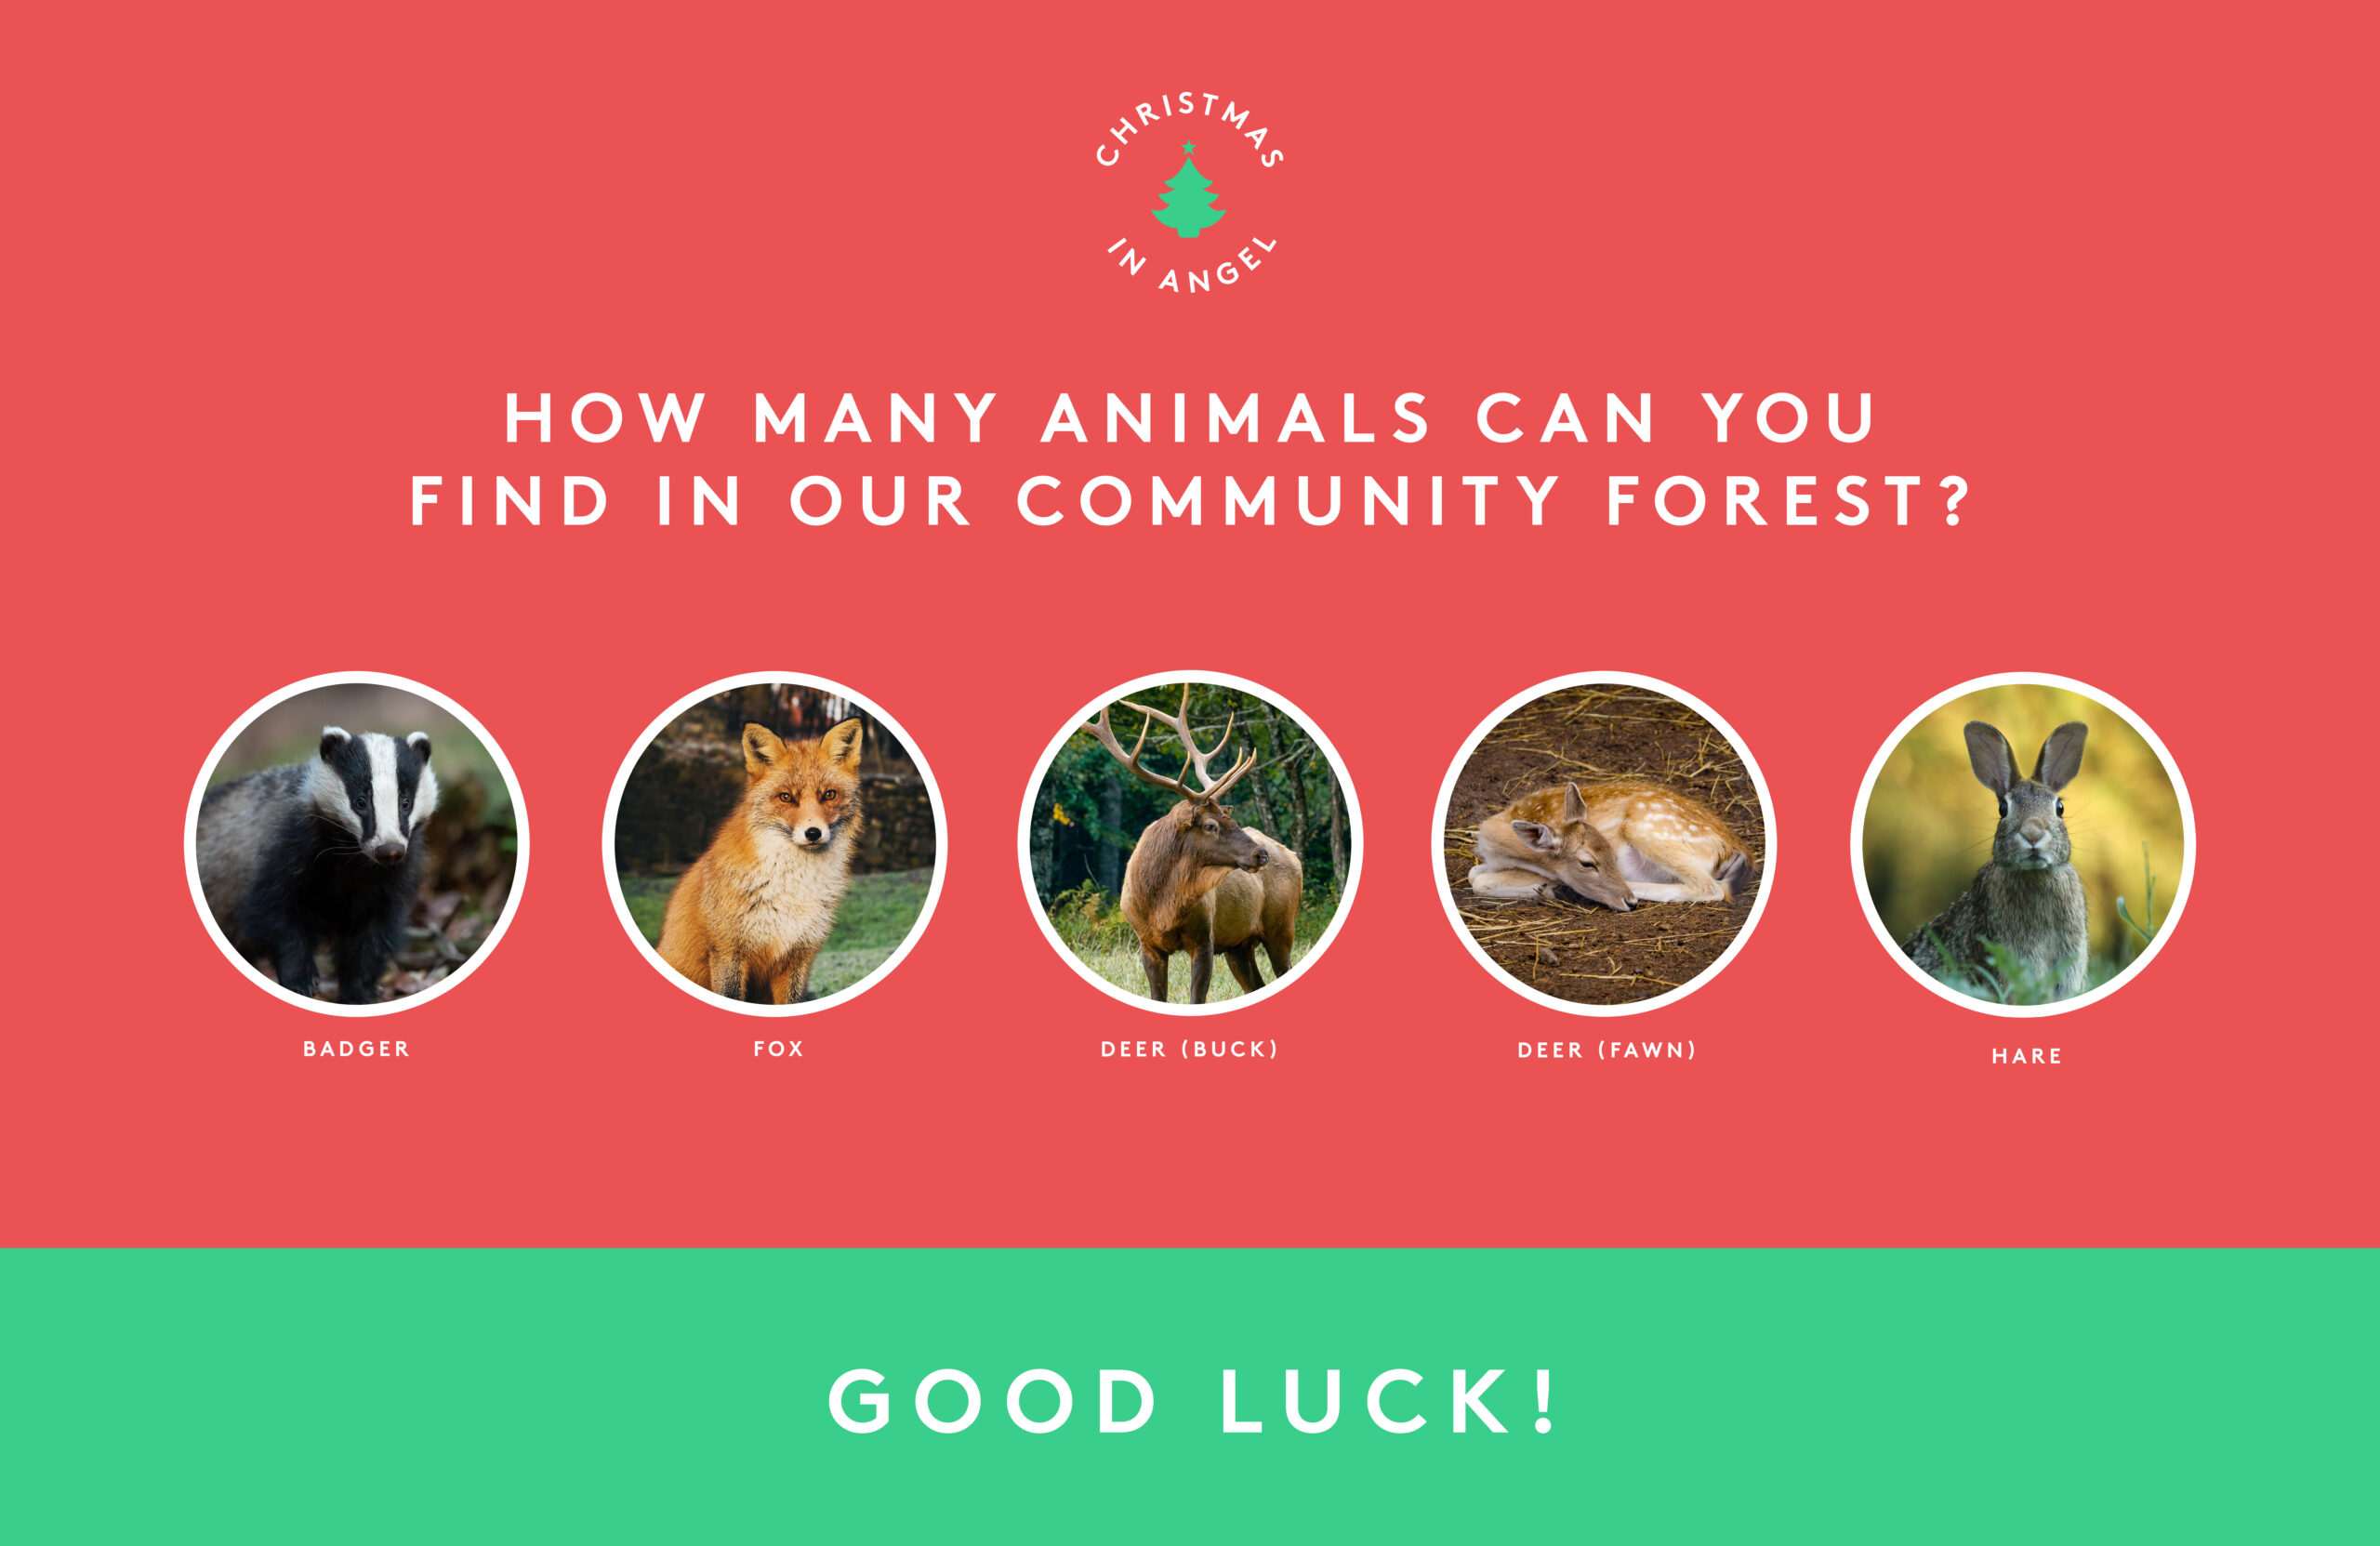 How many animals can you find in our community forest?